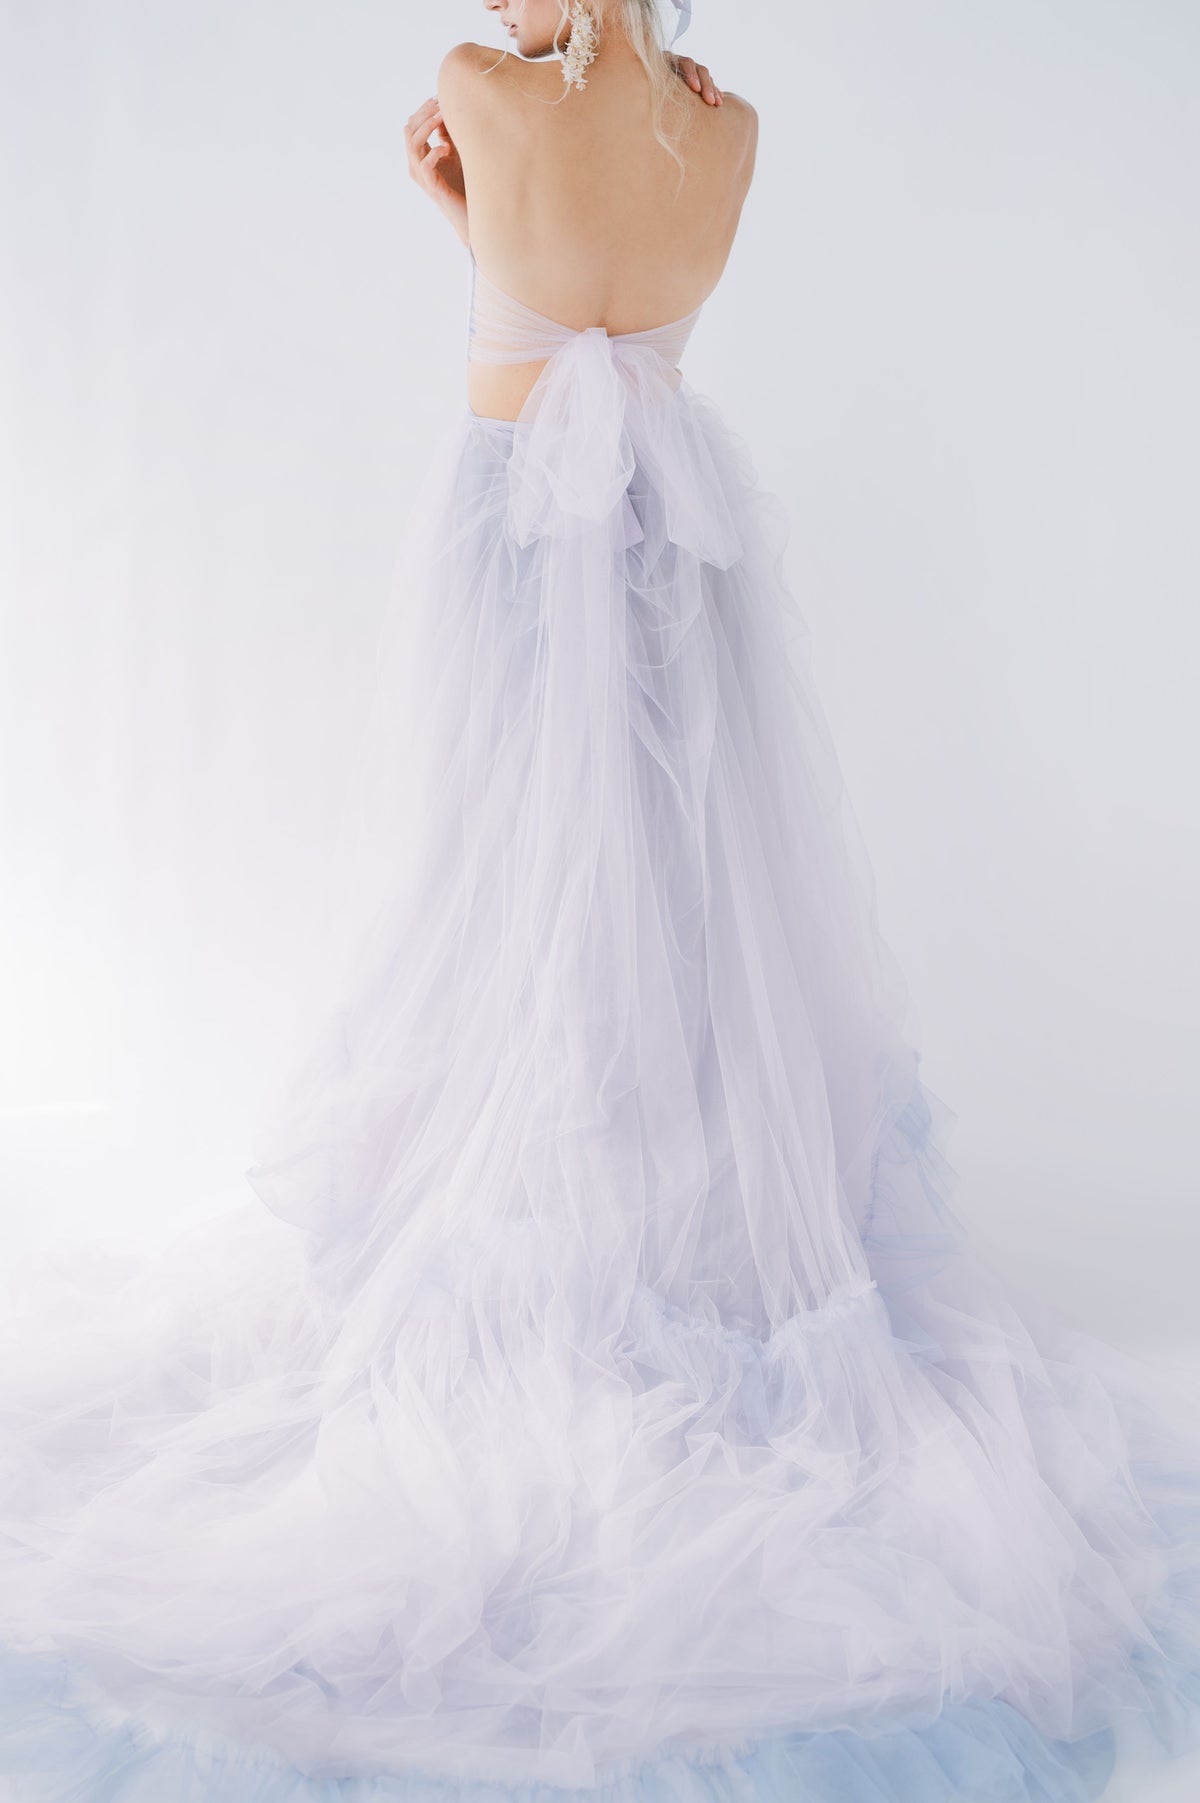 Ultimate whimsical romantic wedding dress. Lavender tulle, ruffled skirt. Three piece dress, overskirt, crop top with big tulle bow. By Catherine Langlois, Toronto